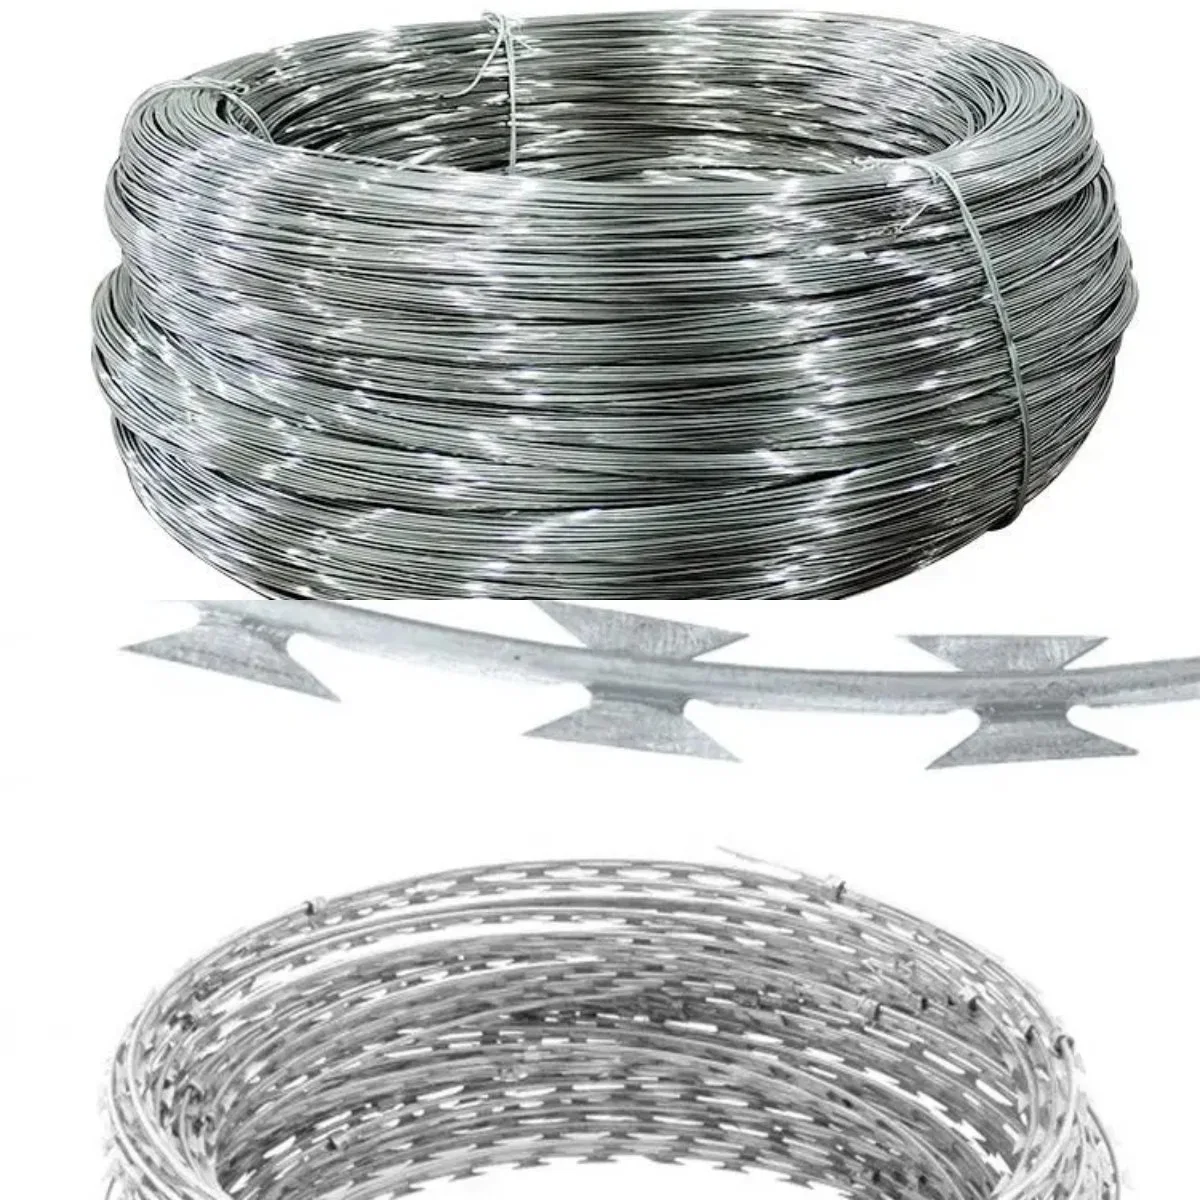 Stainless Steel Barbed Wire with 201 304 Wire Mesh Fence Anti Climb Razor Security Wire